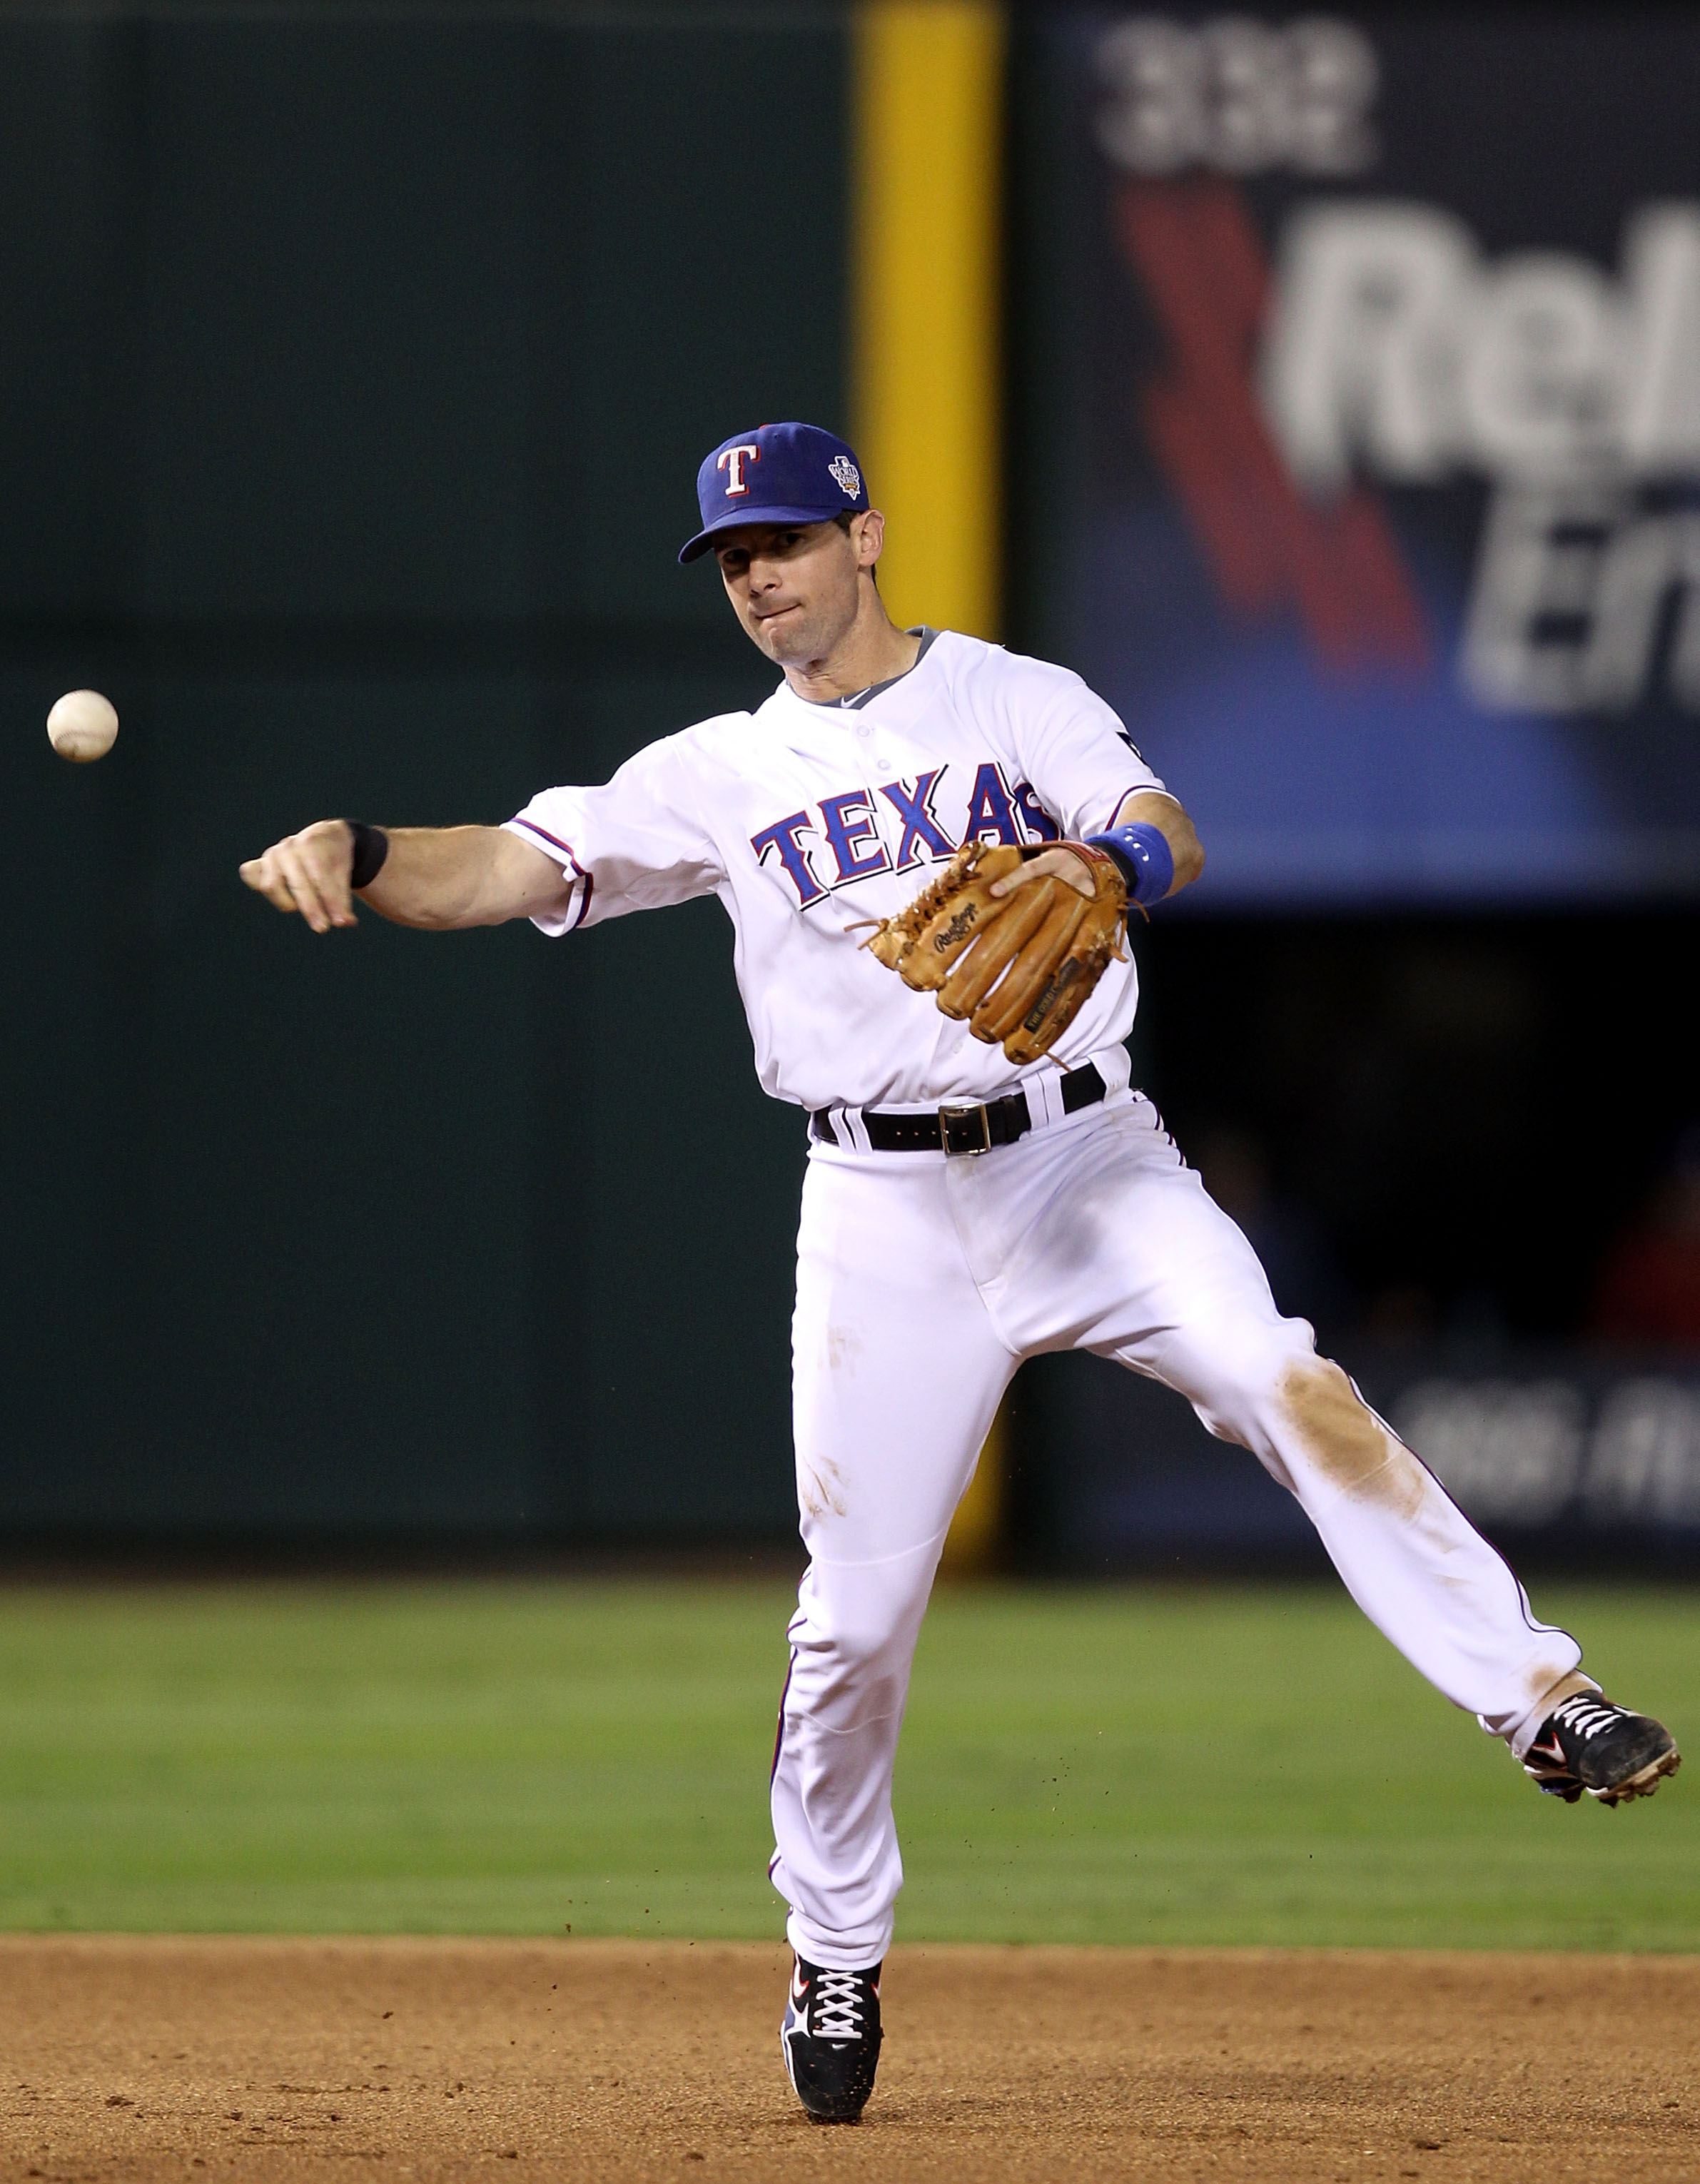 Michael Young Trade Rumors: 10 Teams That Are a Good Fit for the